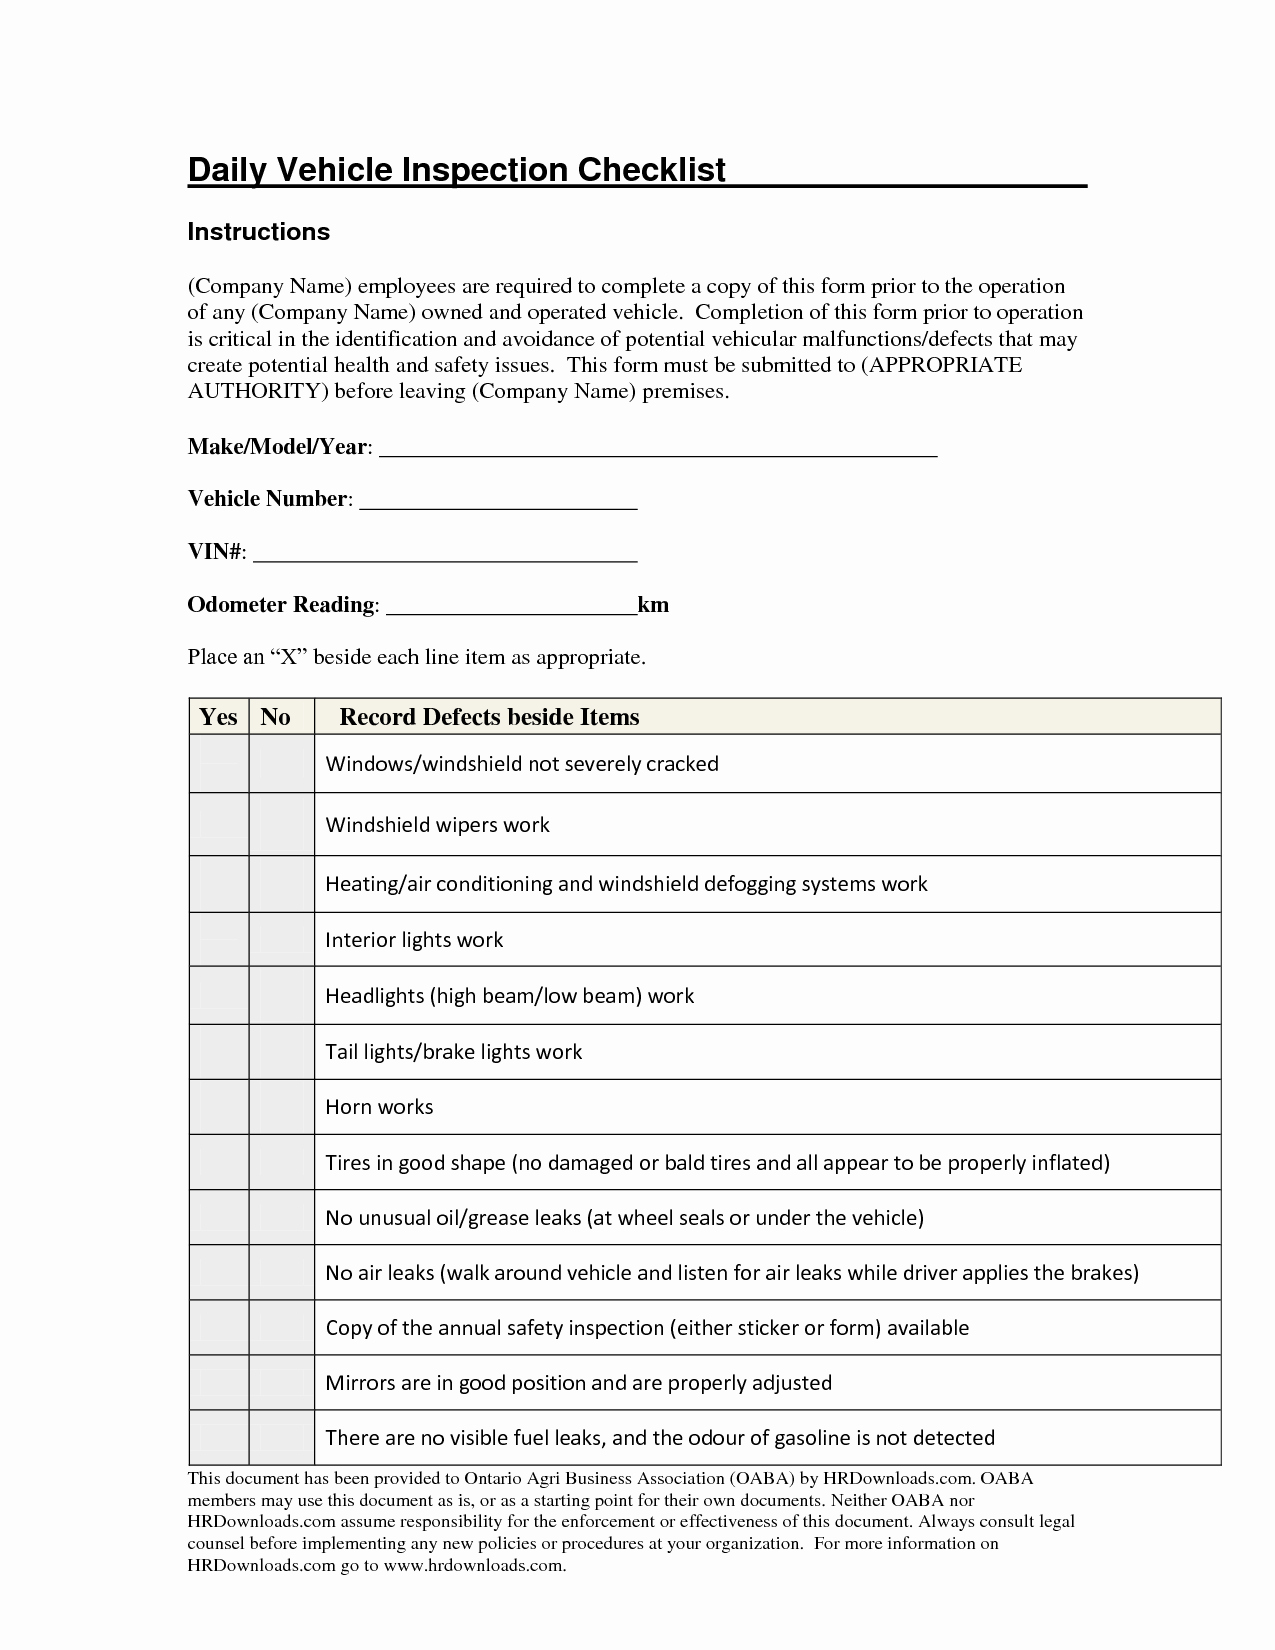 Vehicle Safety Inspection Checklist Template New Daily Vehicle Inspection Checklist form Image Gallery Gyps Fice forms